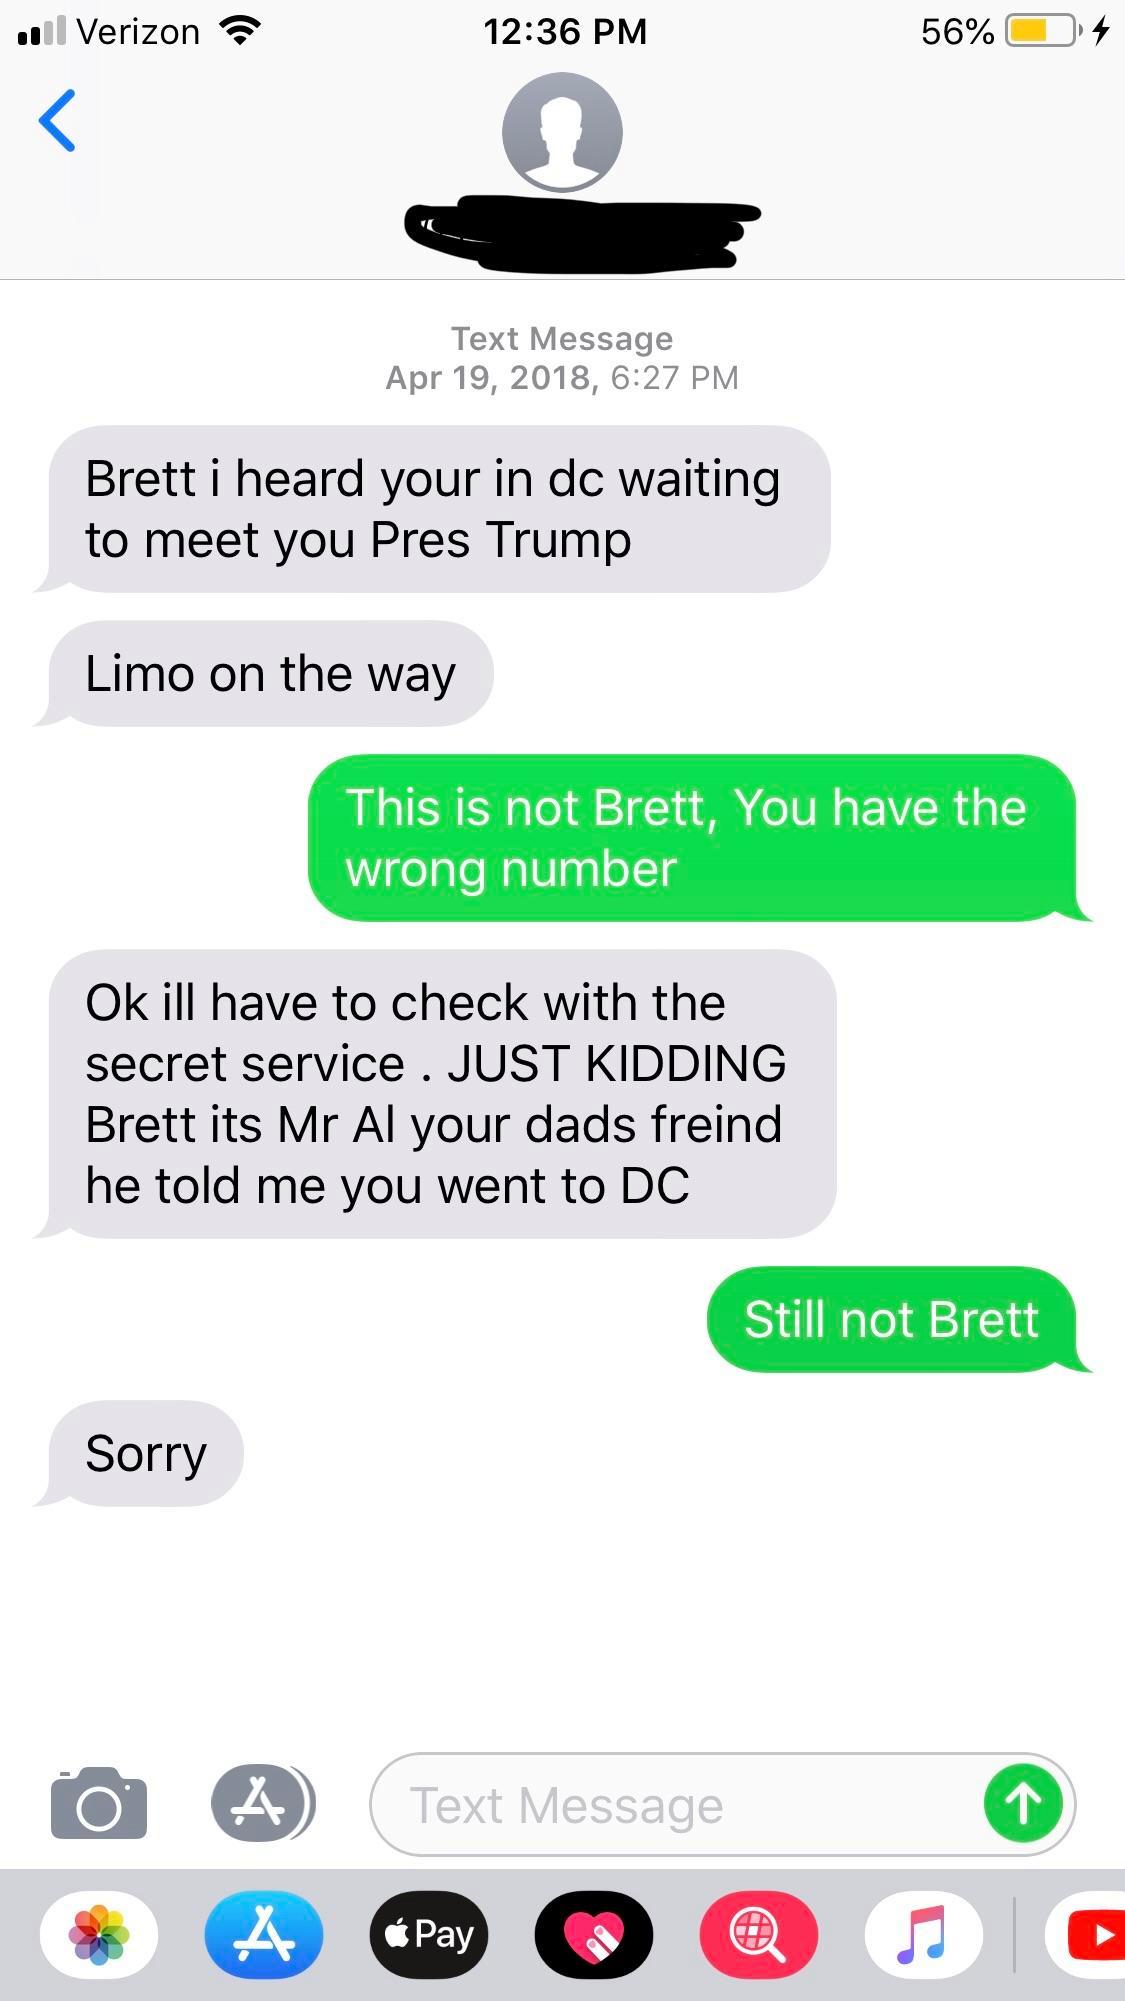 wrong number messages between boyfriend and girlfriend - ul Verizon 56% O4 Text Message , Brett i heard your in dc waiting to meet you Pres Trump Limo on the way This is not Brett, You have the wrong number Ok ill have to check with the secret service . J